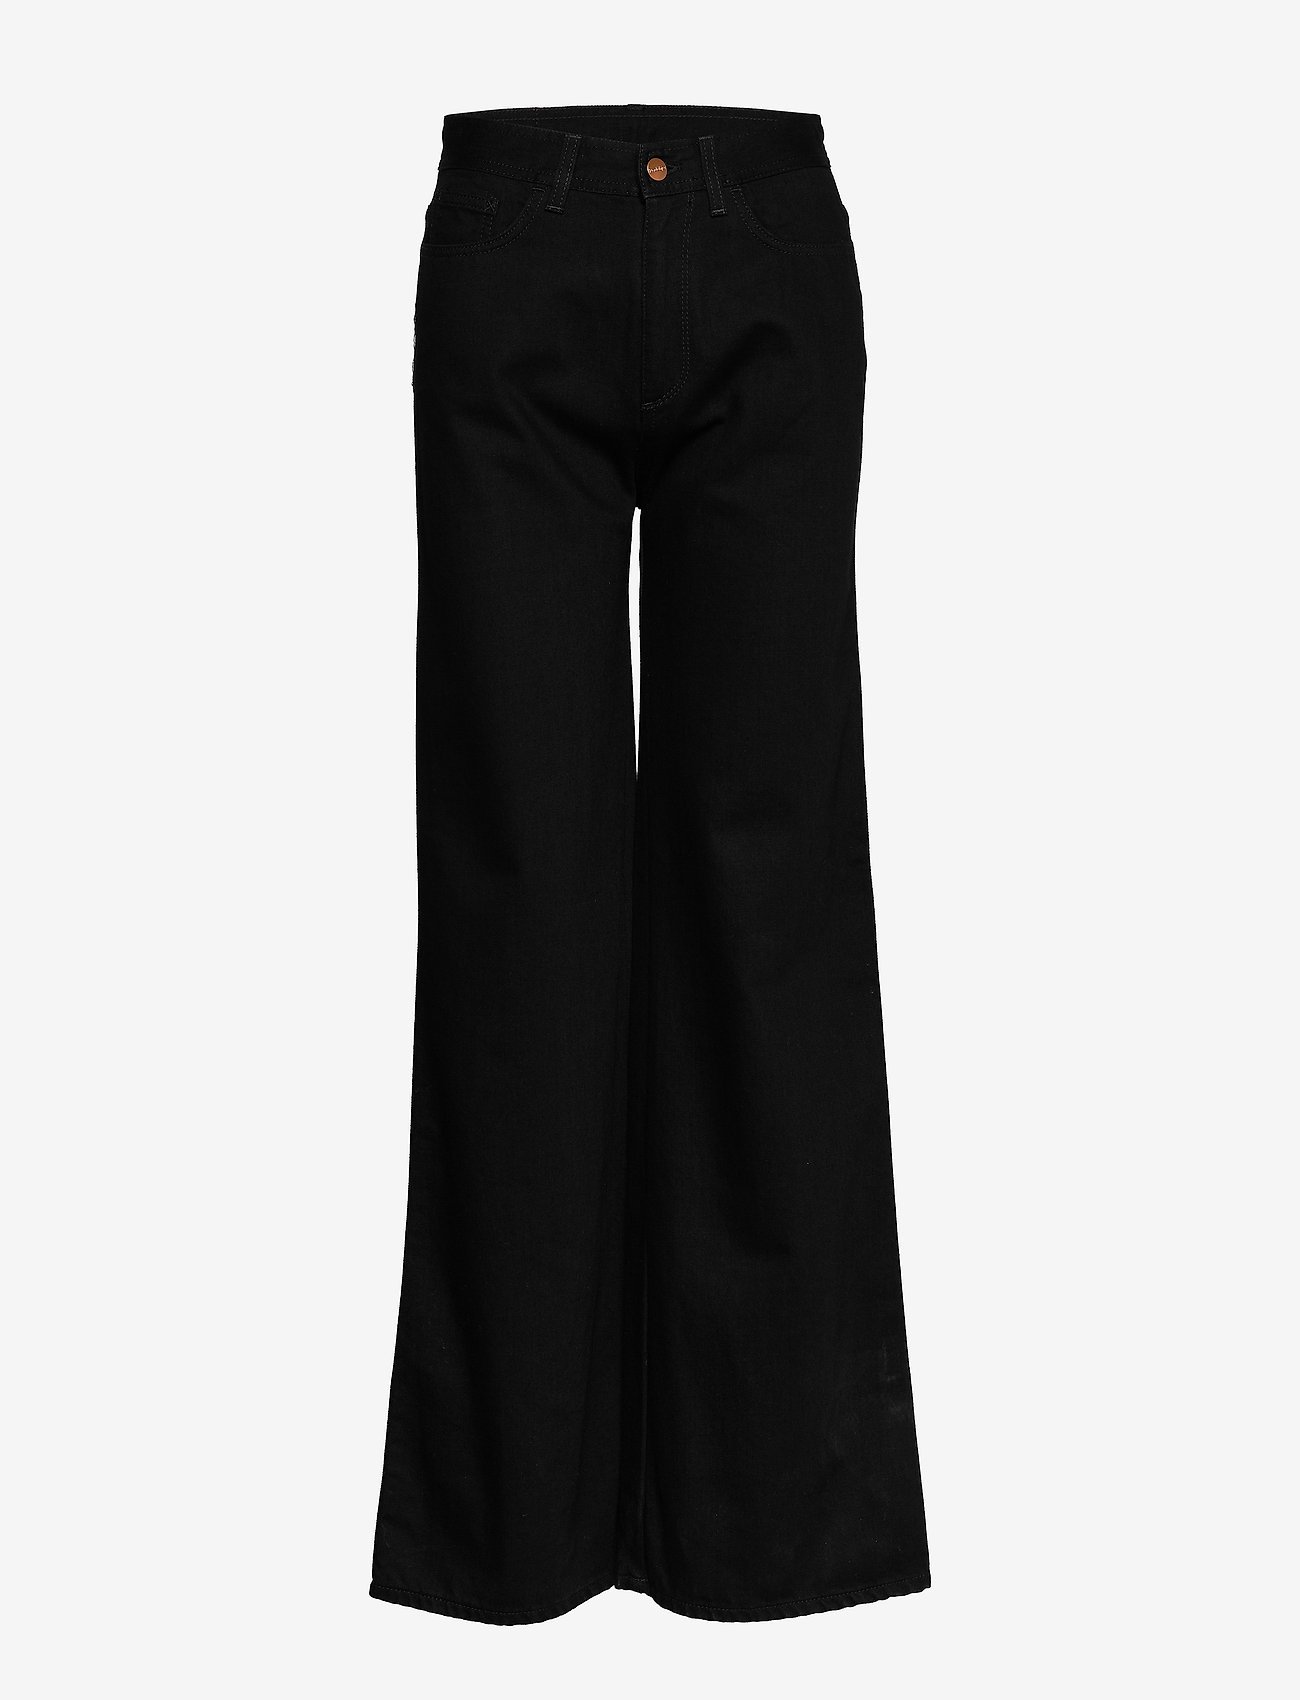 RODEBJER - RODEBJER HALL - flared jeans - black - 0